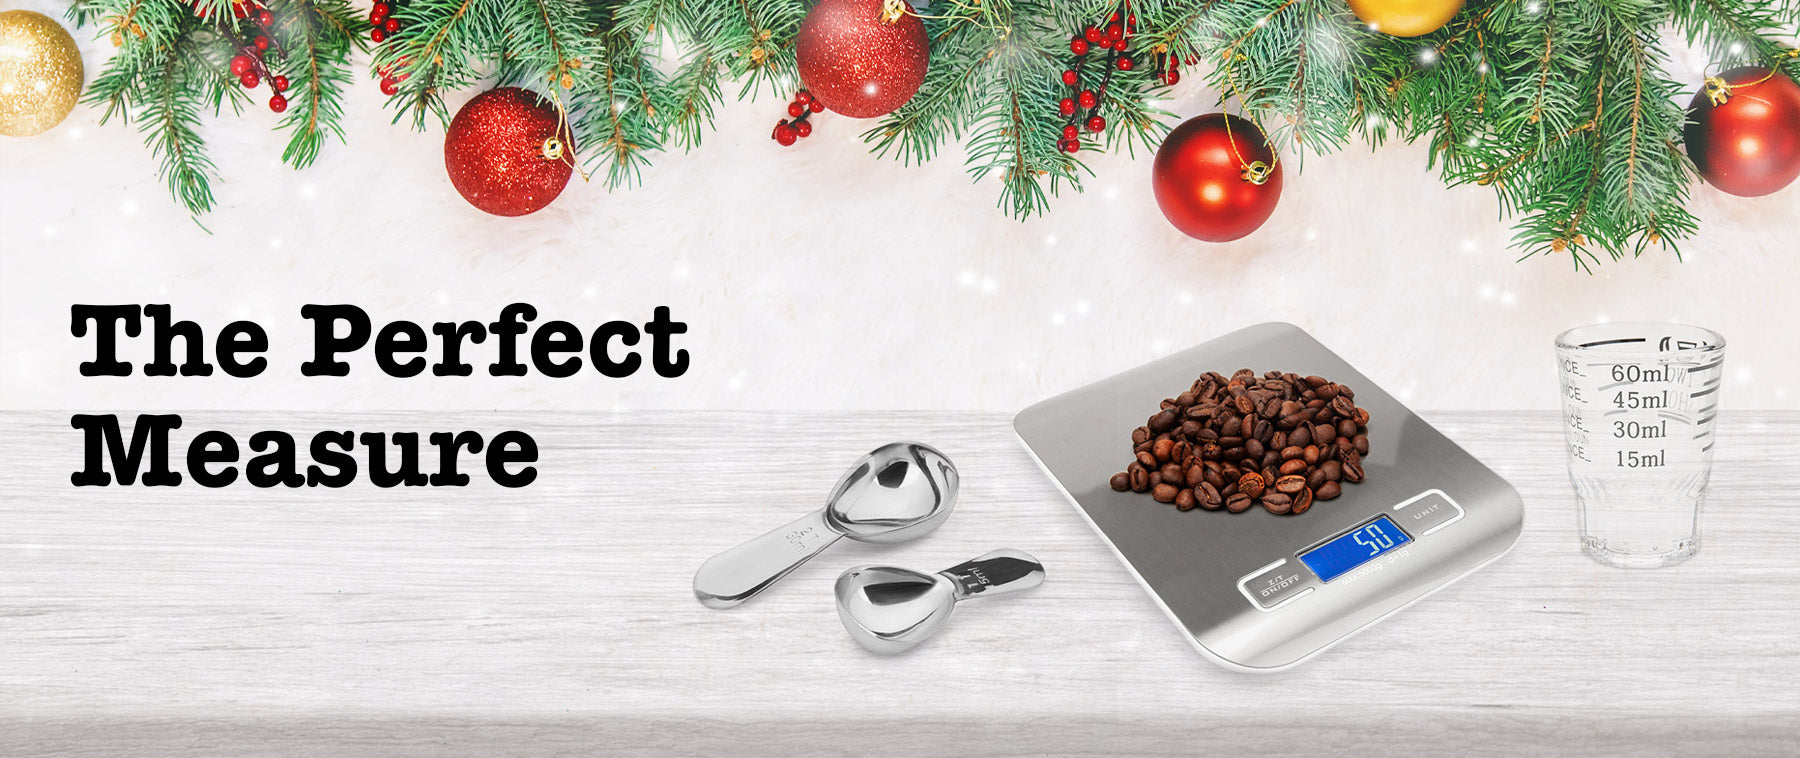 Perfect Gifts to create the perfectly crafted coffee - EspressoWorks Holiday Gift Guide for Coffee Lovers